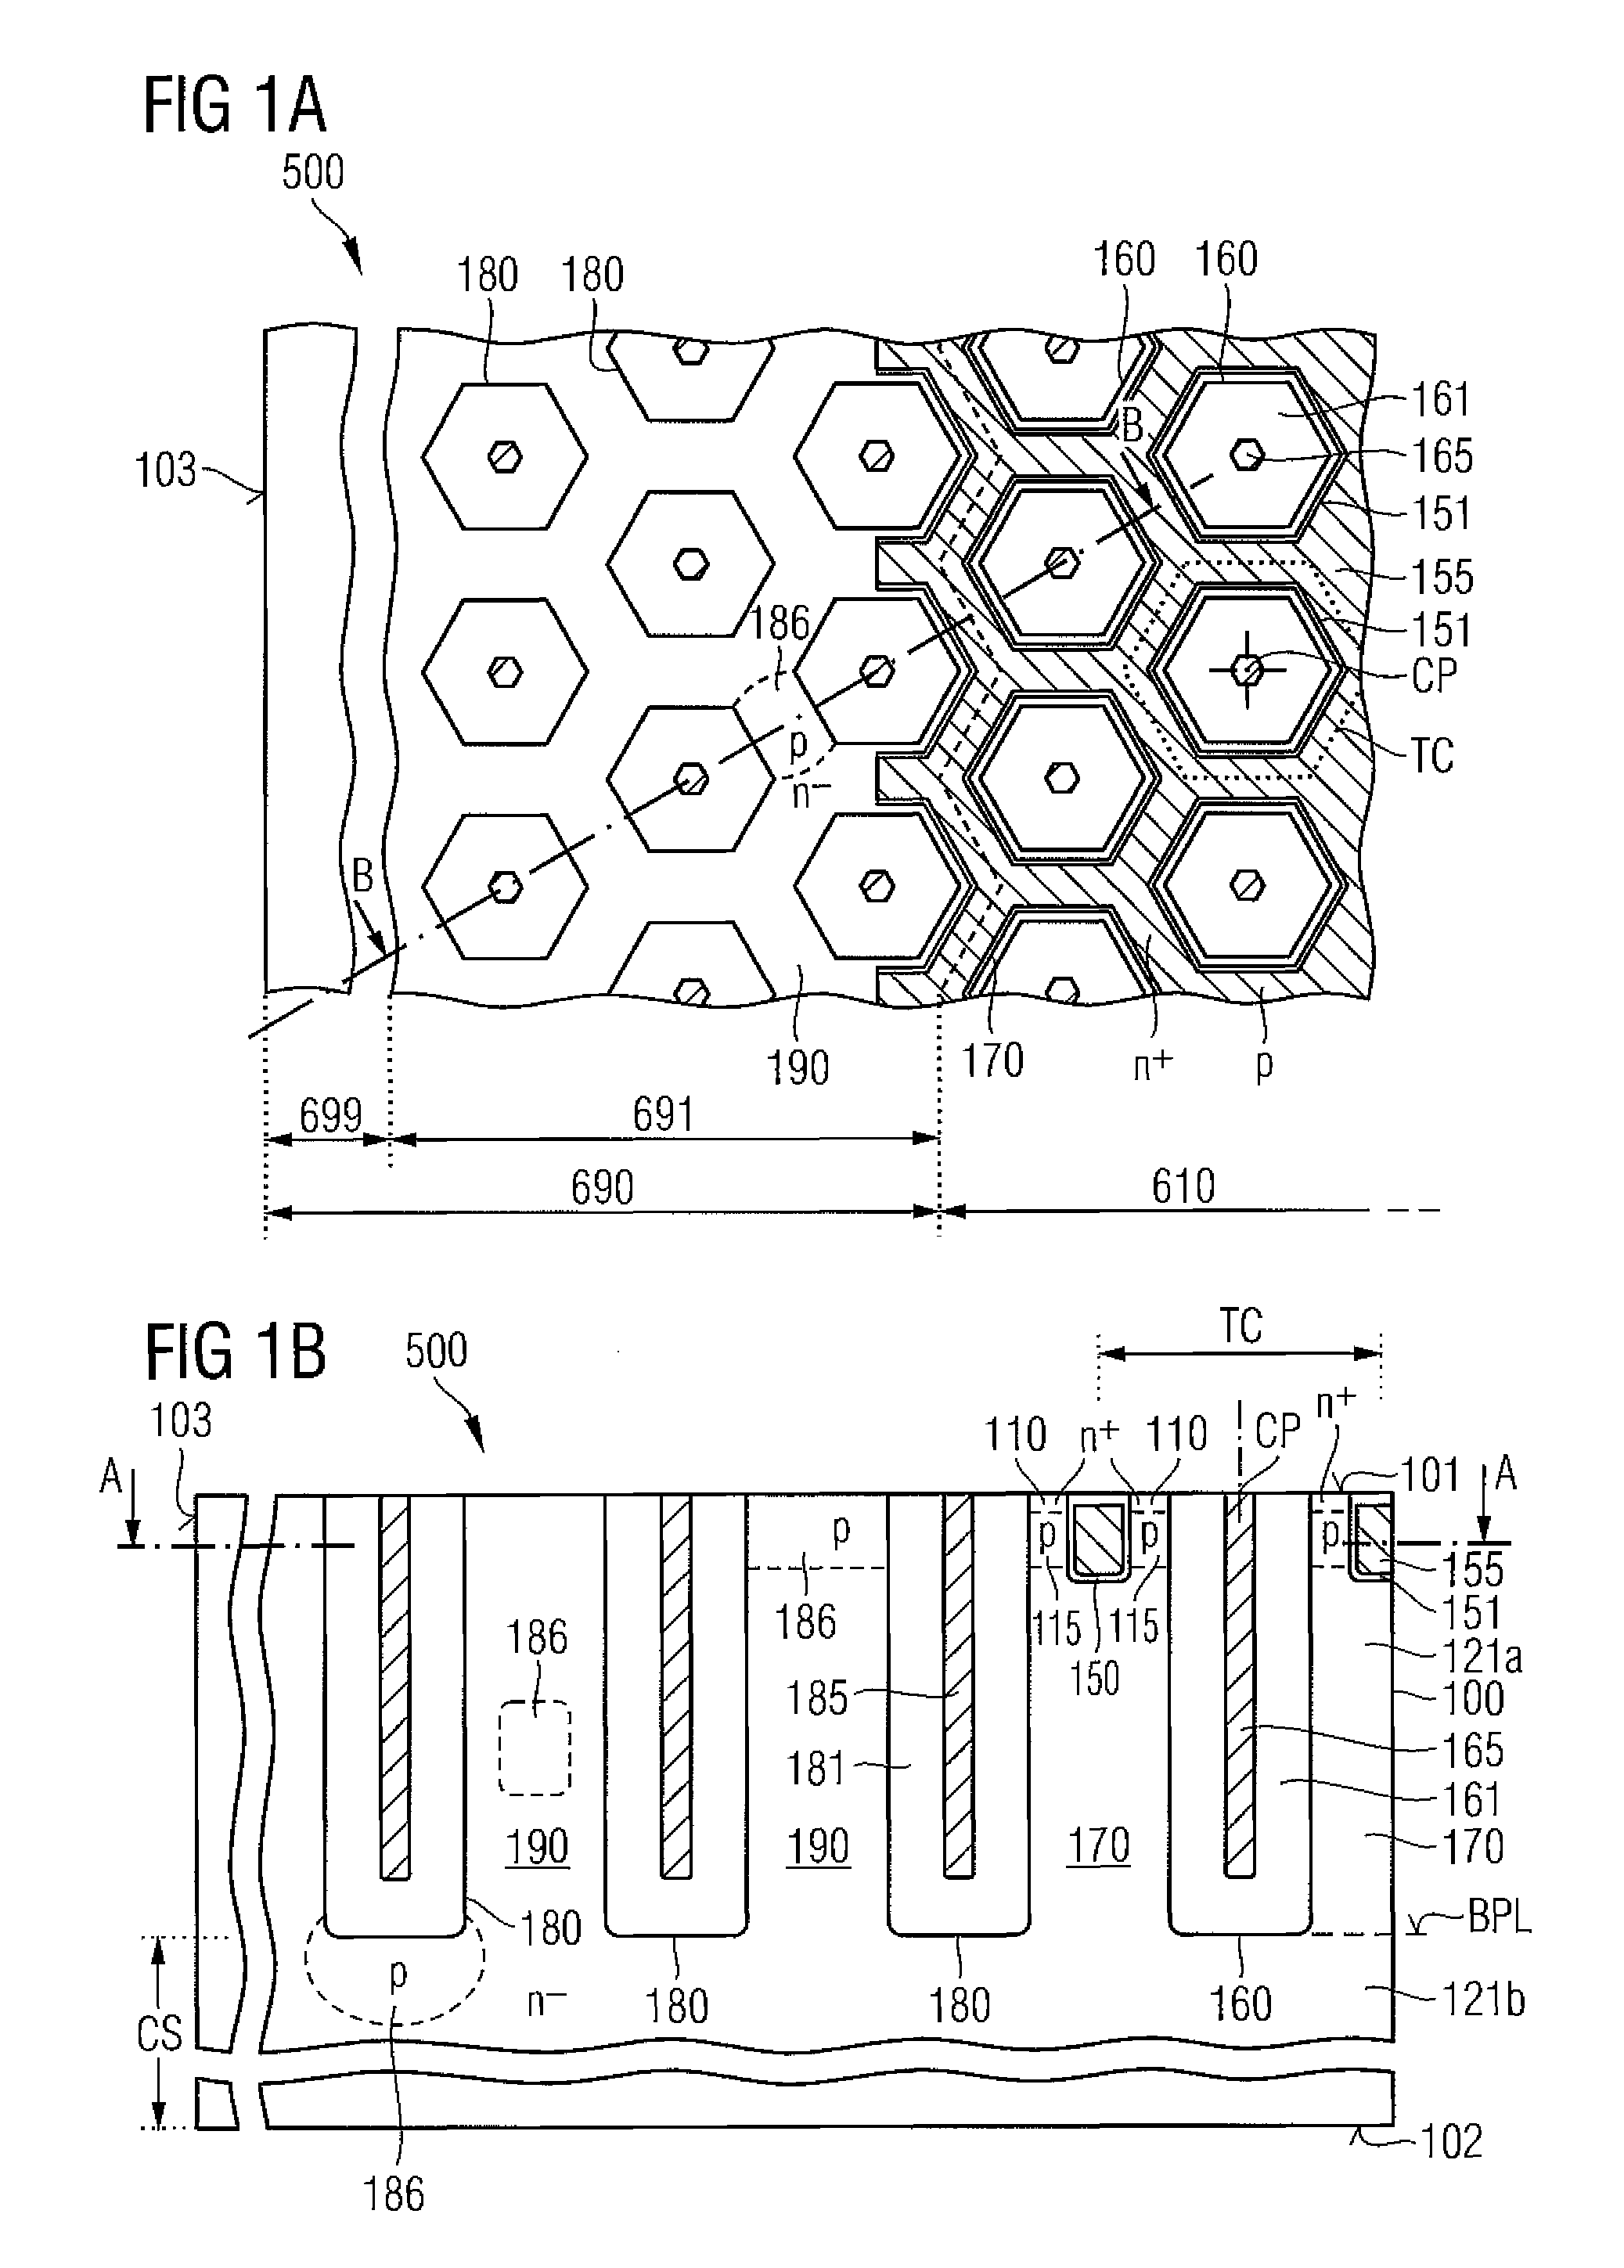 Semiconductor Device with Field Electrode Structures in a Cell Area and Termination Structures in an Edge Area